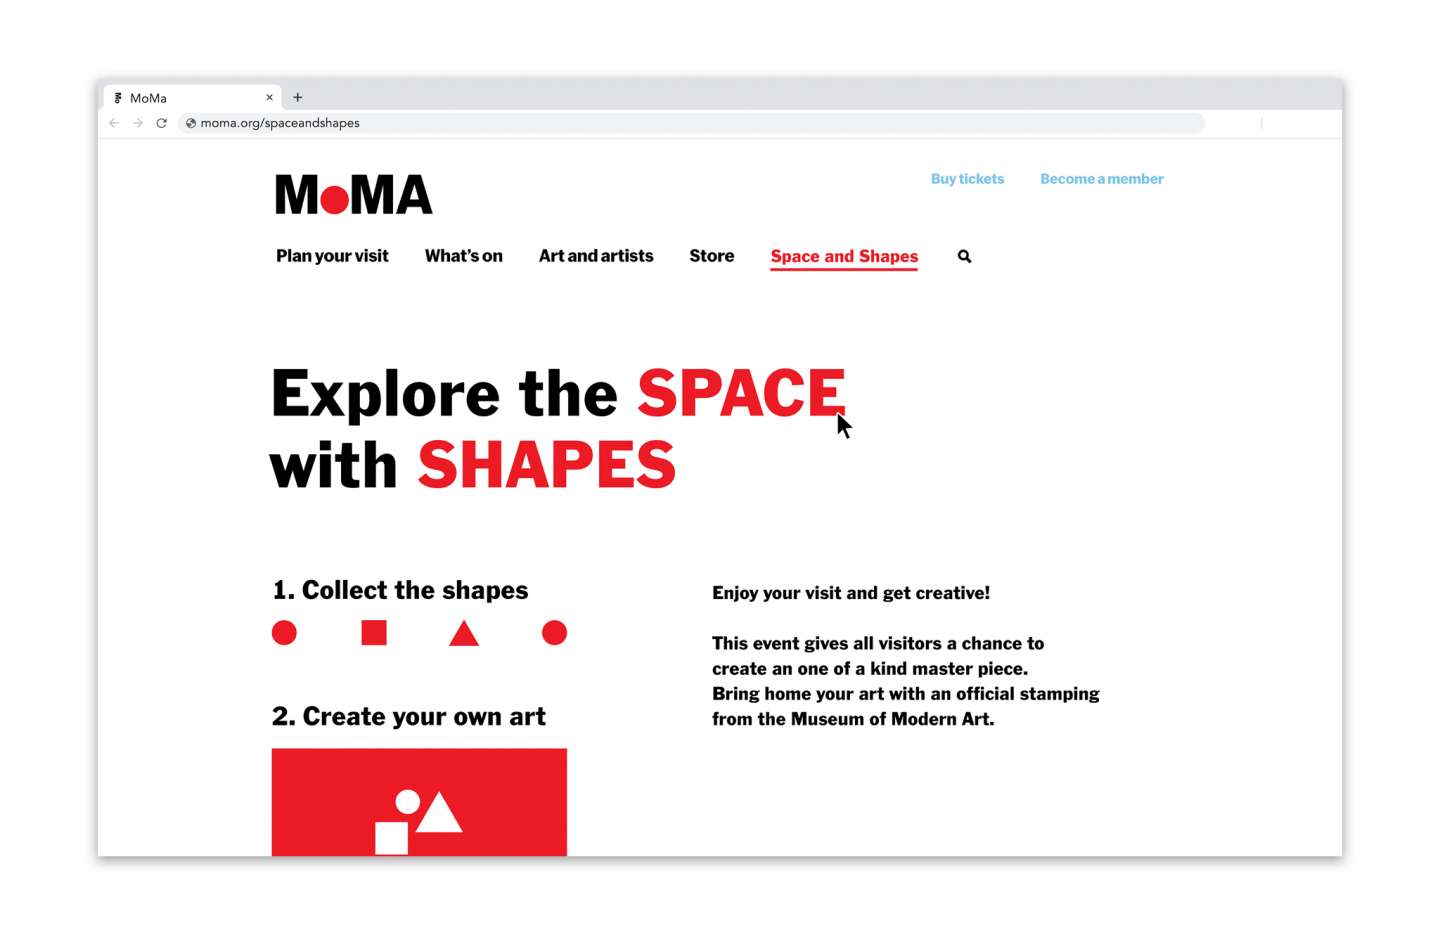 MoMA: Space and Shapes